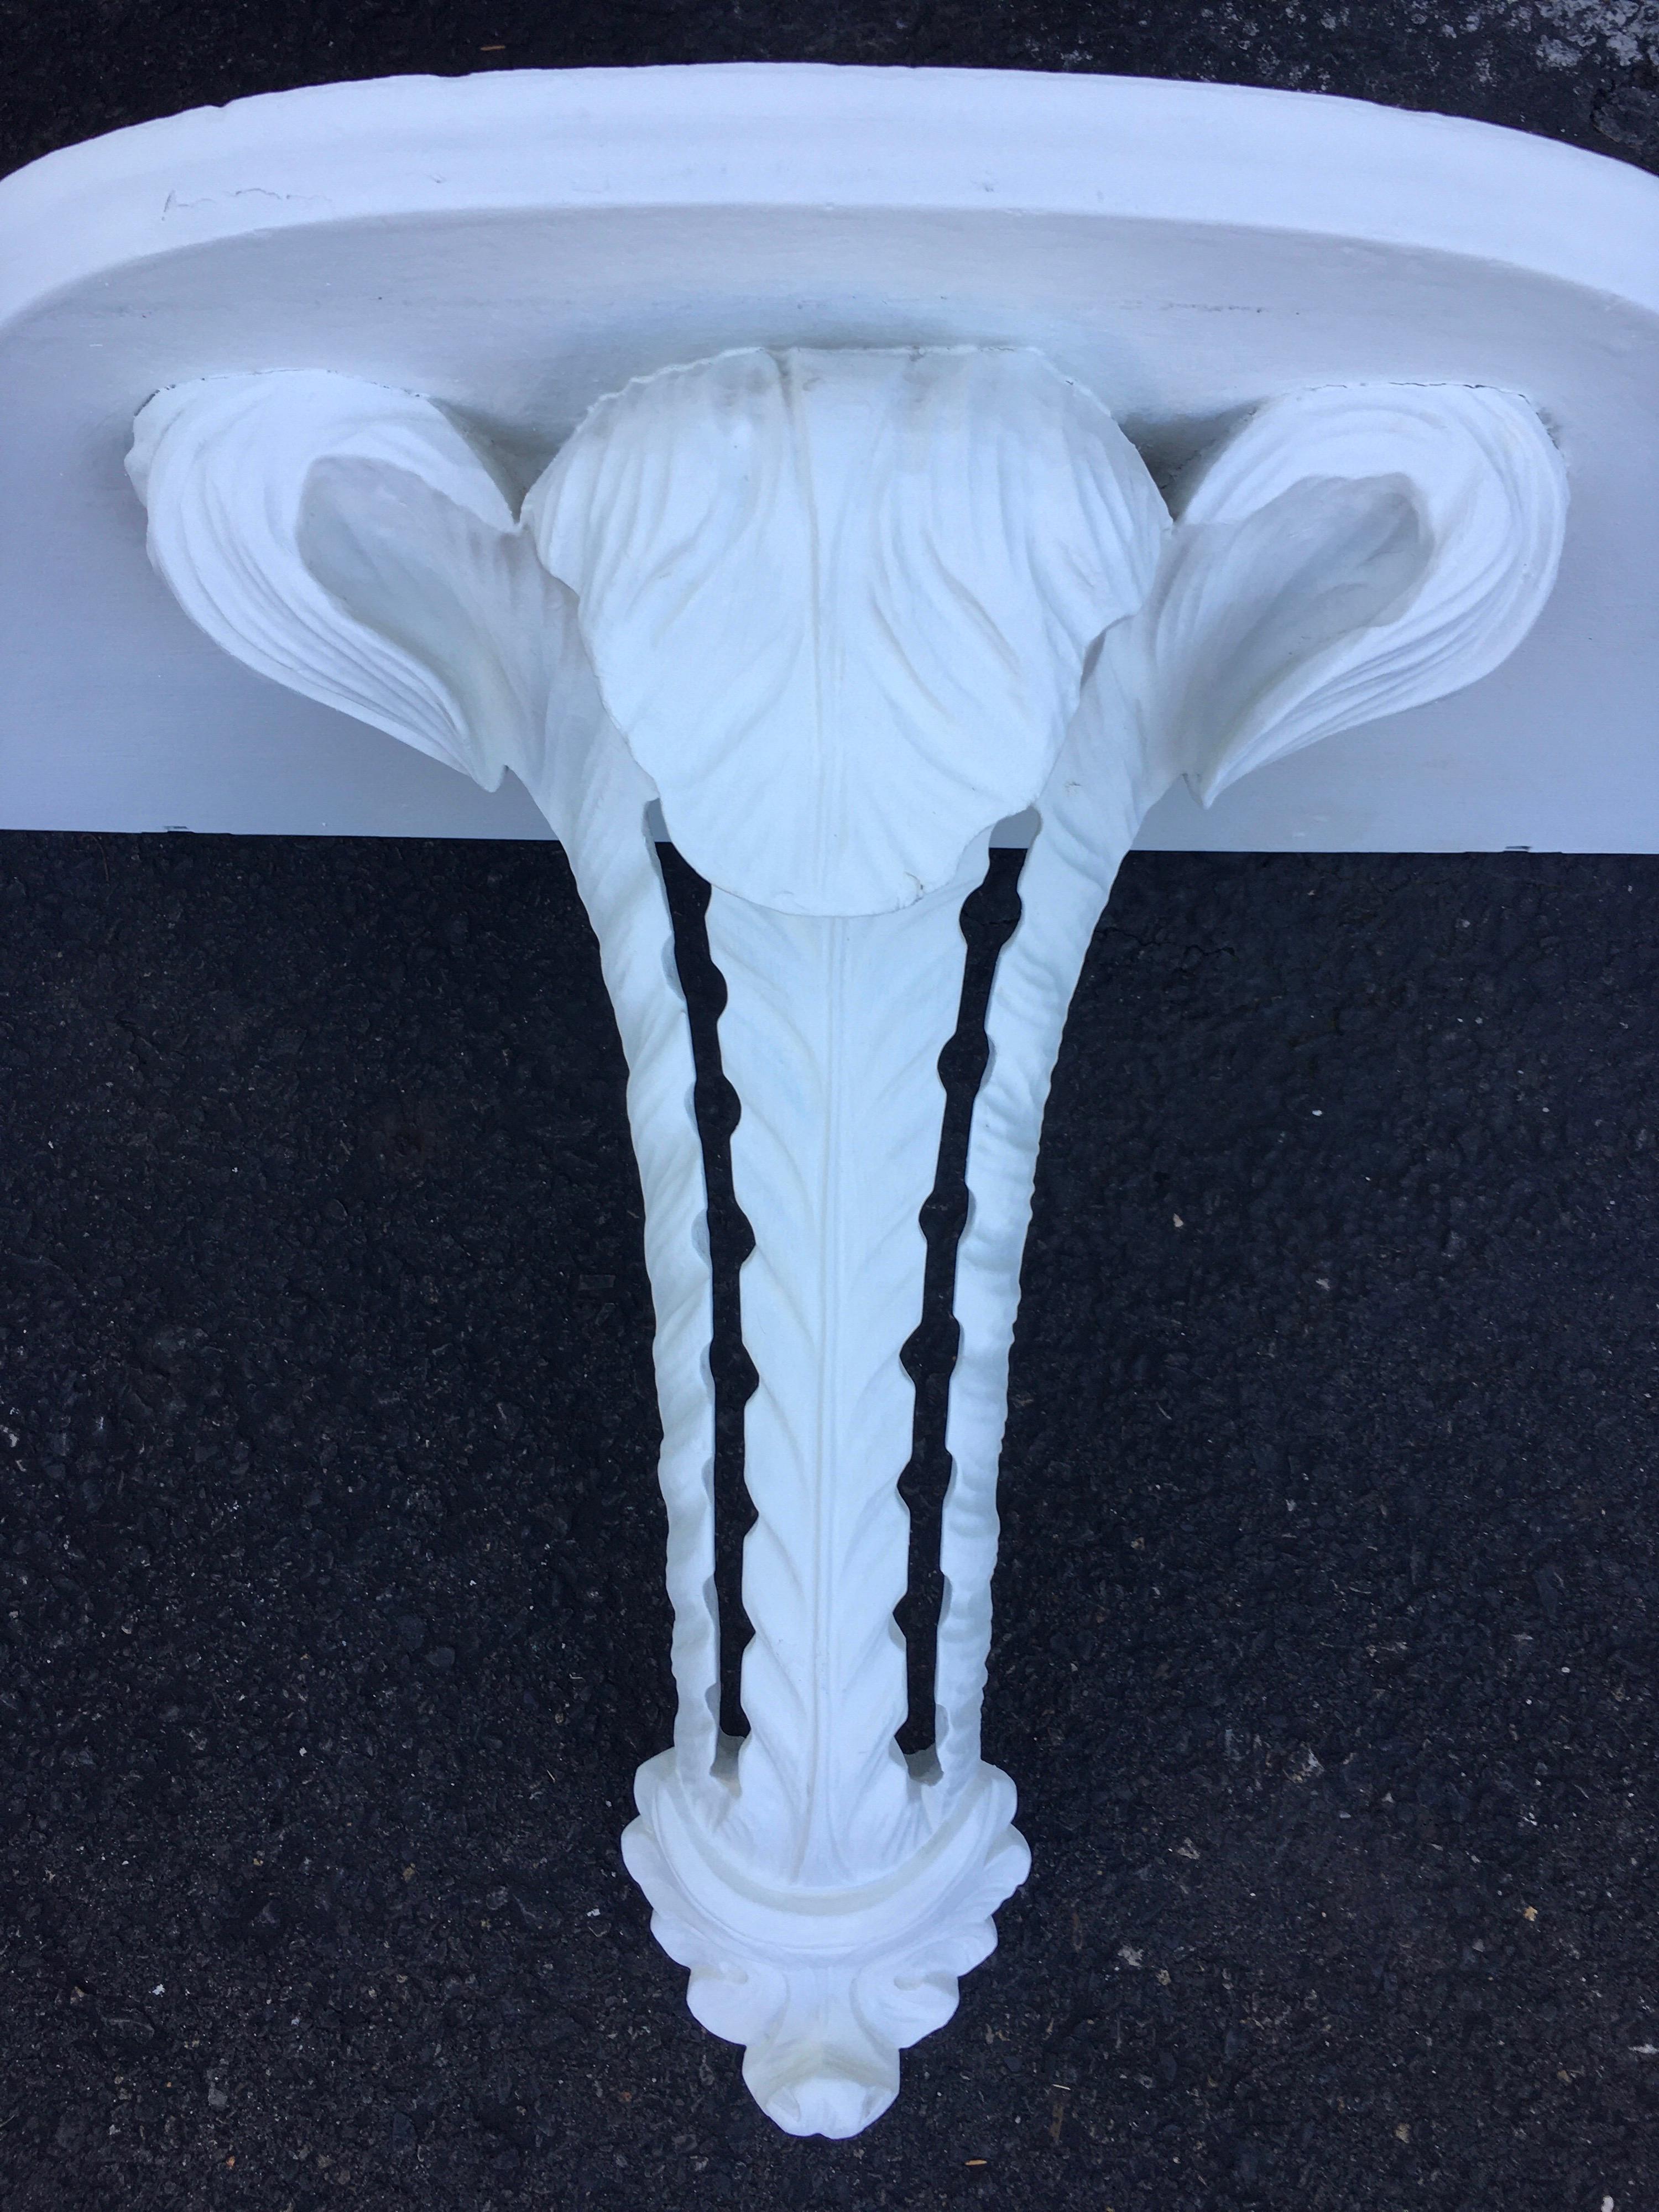 Hollywood Regency Serge Roche style wall mount console shelf. This large sculptural carved wood bracket features a scrolled plume design in a matte white plaster-like painted finish.